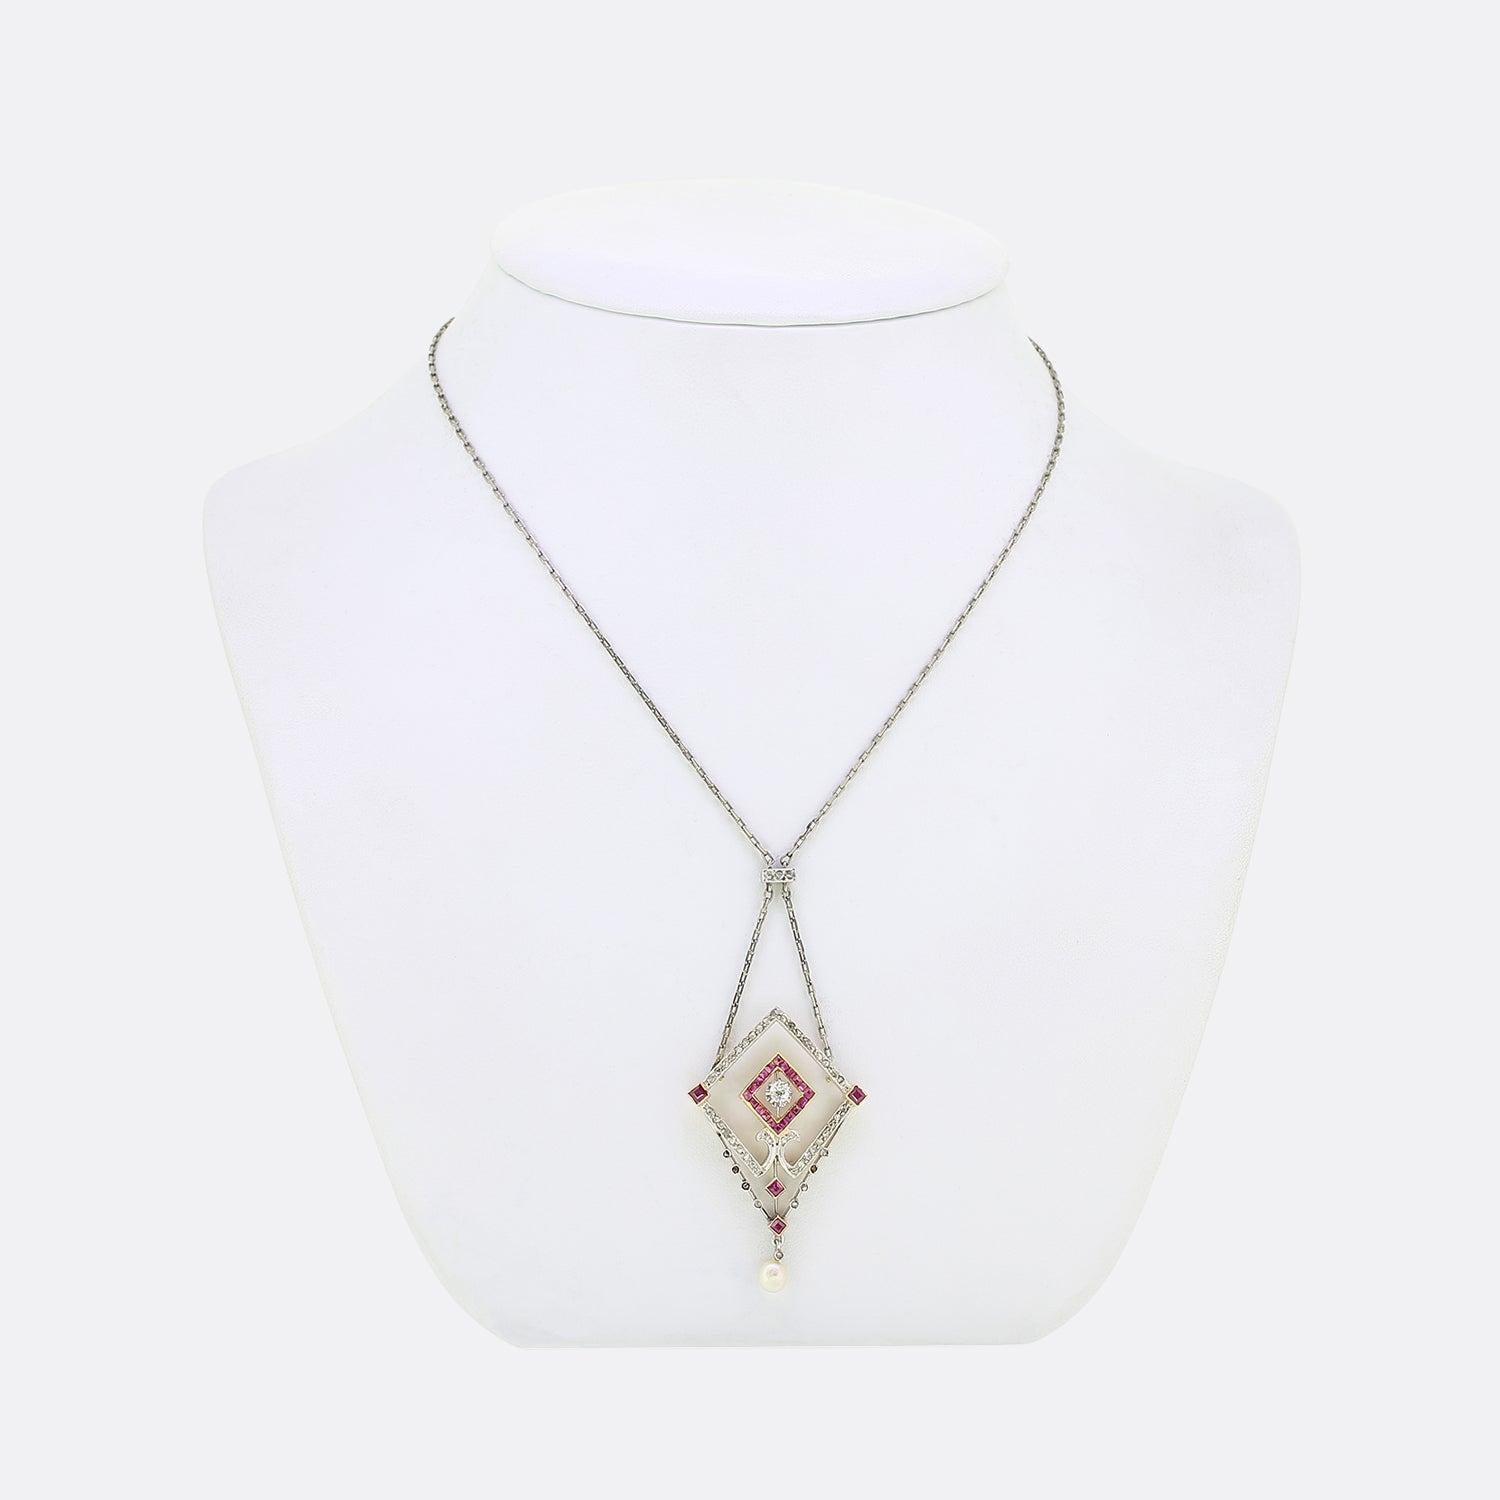 Here we have a excellent platinum and 18ct gold necklace from the Edwardian era. An open geometric frame plays host to a row of rose cut diamonds around the outer edge in a fine milgrain detailing. Square shaped rubies possessing a lovely pinky red